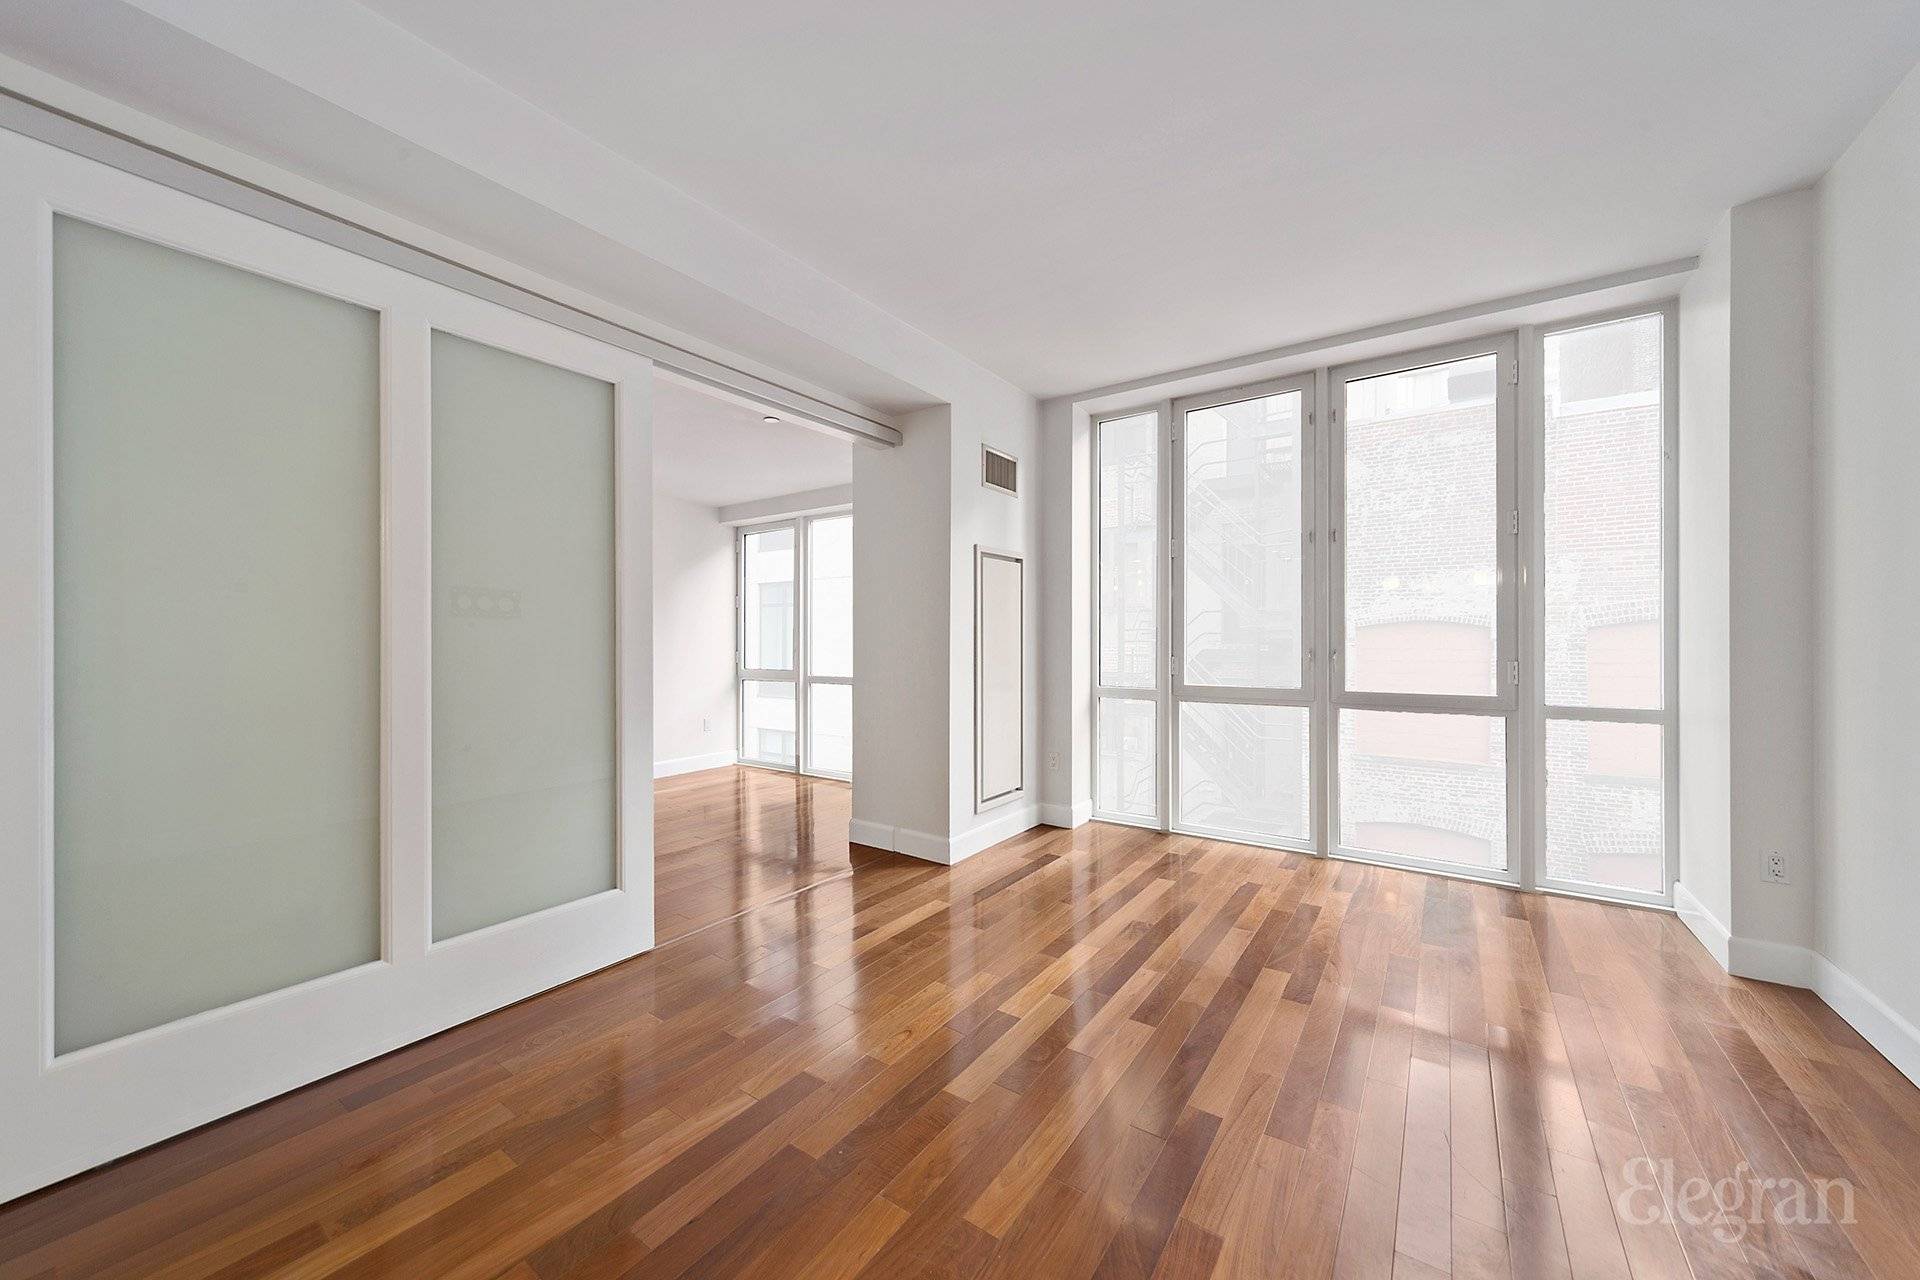 Located in Manhattan s most desirable neighborhood and designed by award winning architect H.